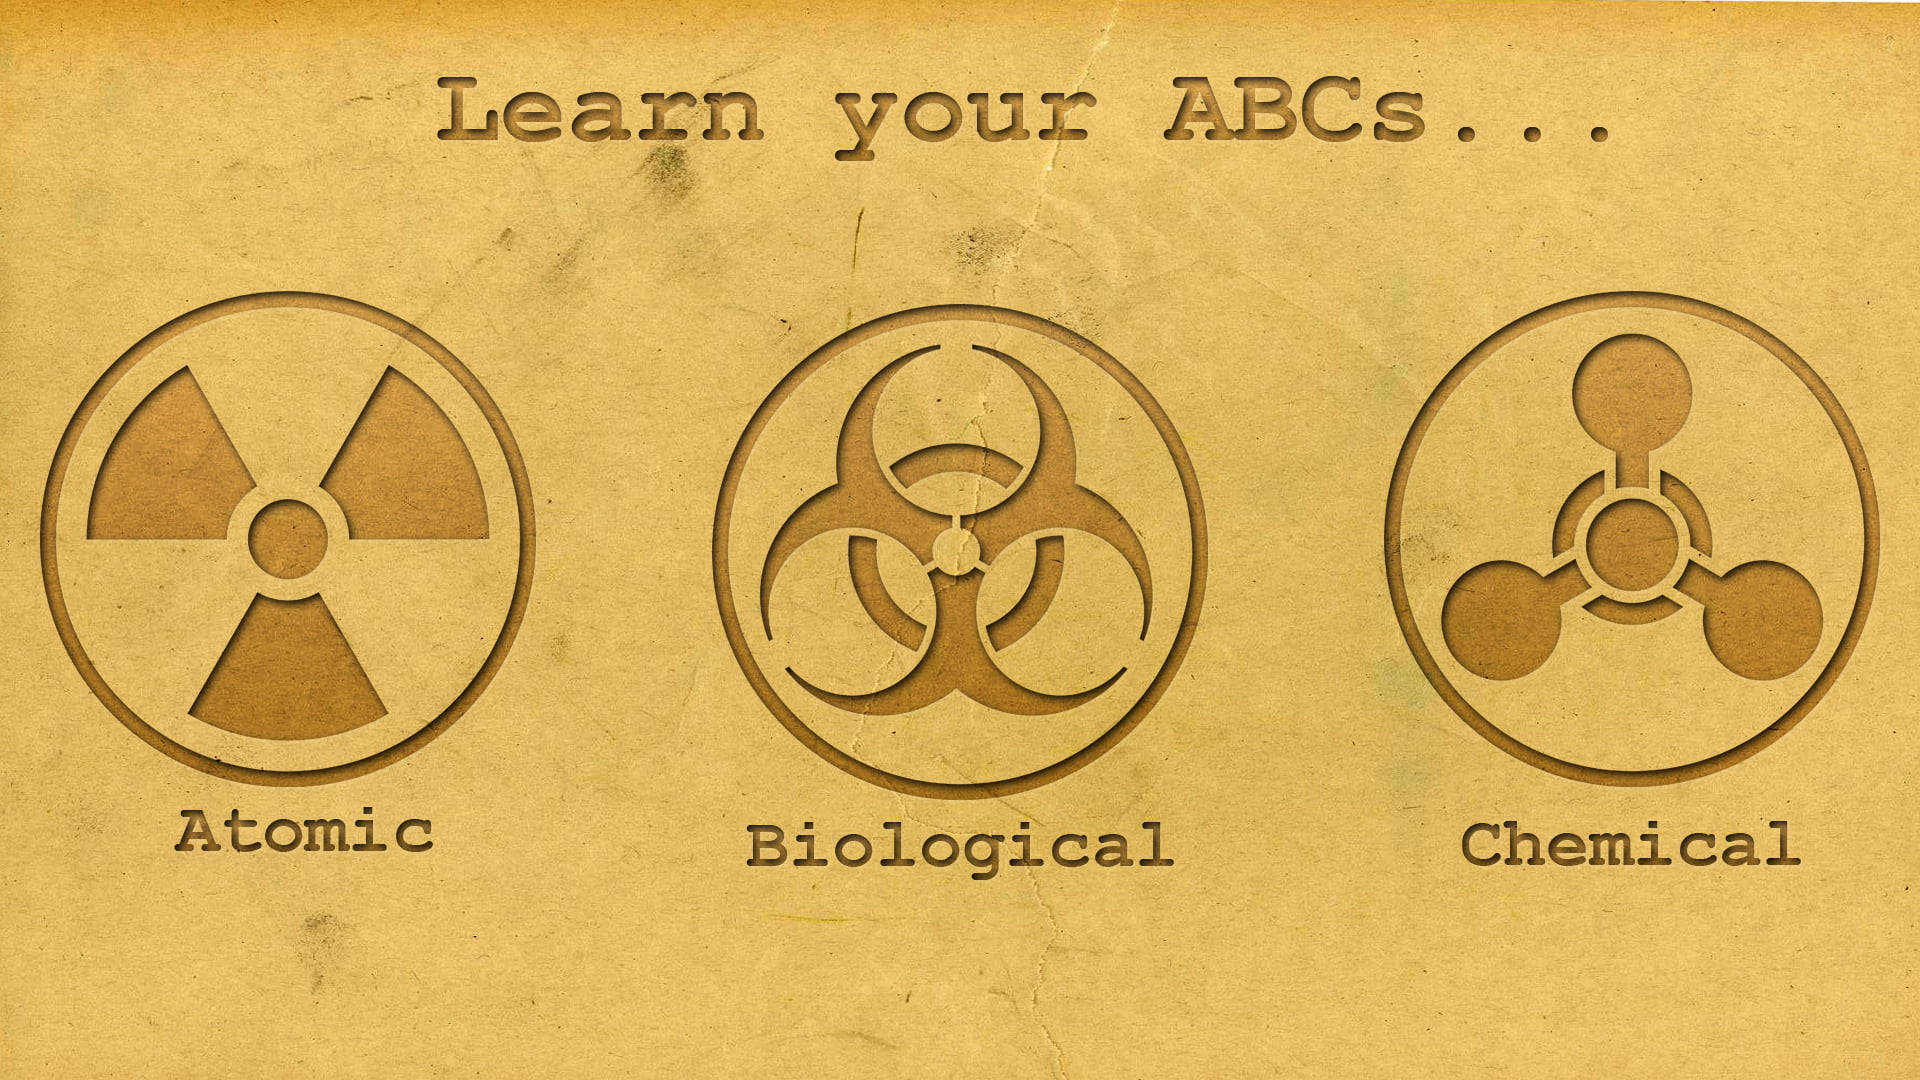 Abc Atomic Biological And Chemical Logos